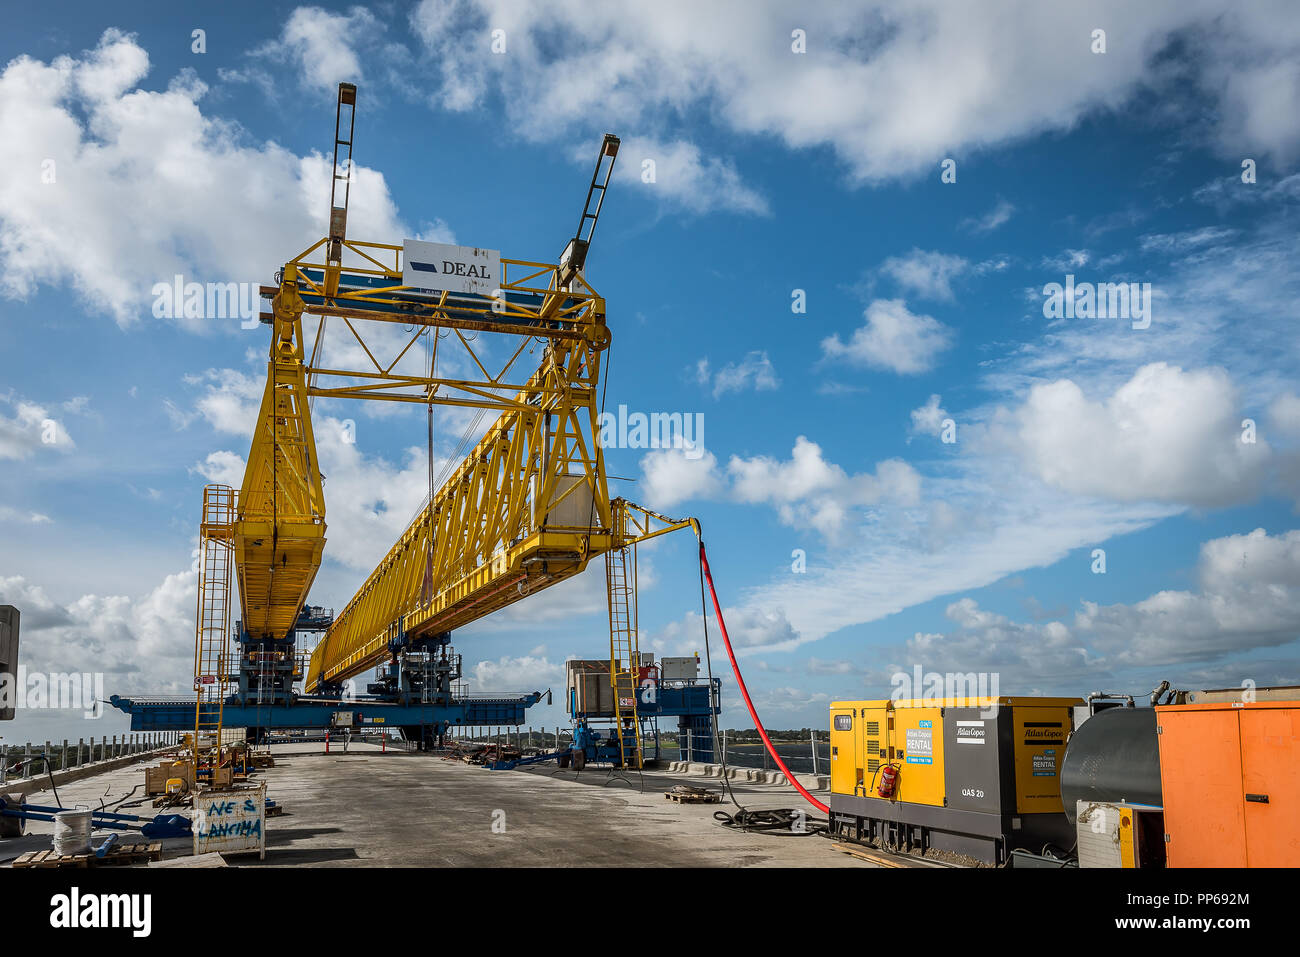 The crane at The Crown Princess Mary Bridge, a construction site in Fredrikssund, Denmark, September 23, 2018 Stock Photo